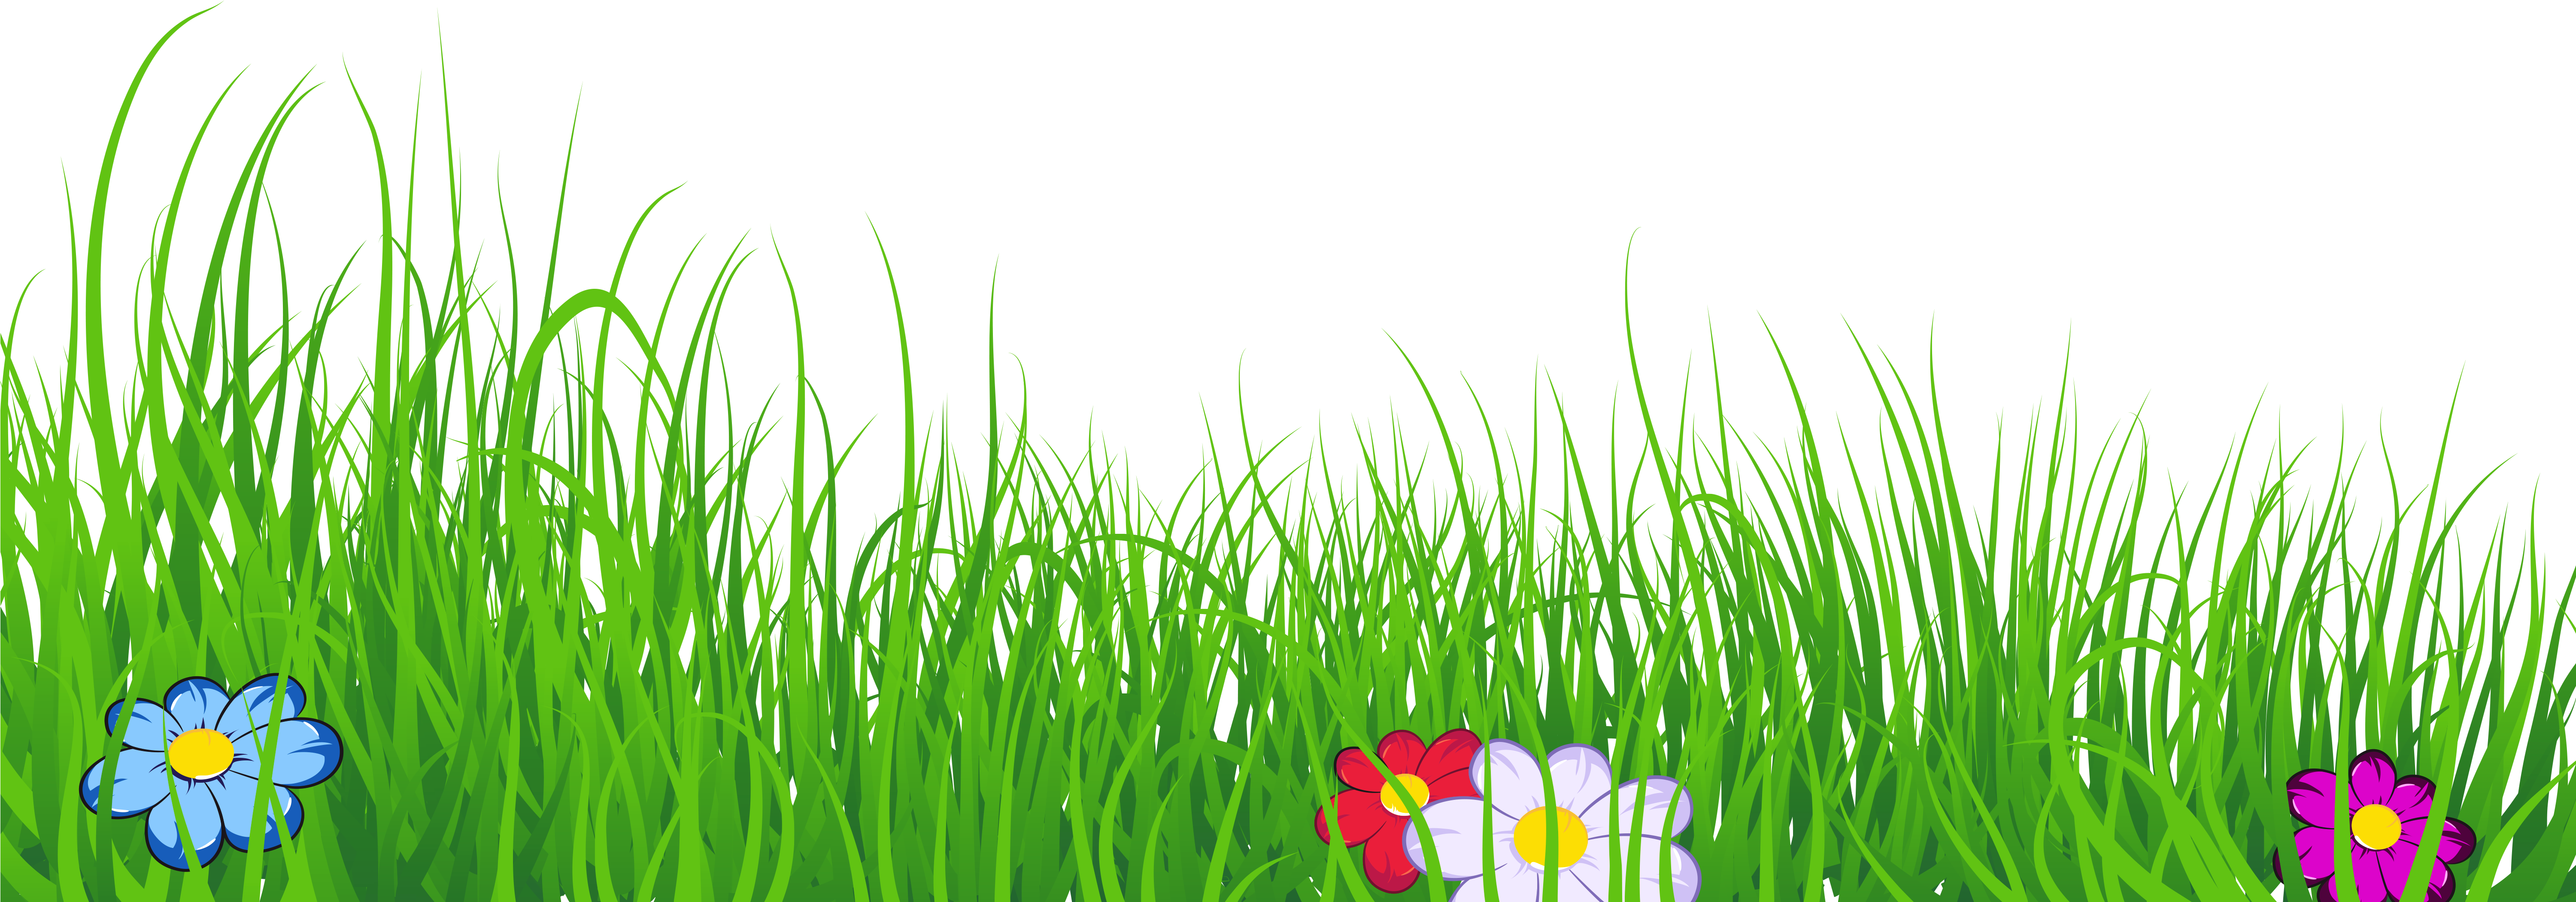 Stone Clipart Green Grass Background - Grass Clipart Transparent Background  - (6000x2460) Png Clipart Download